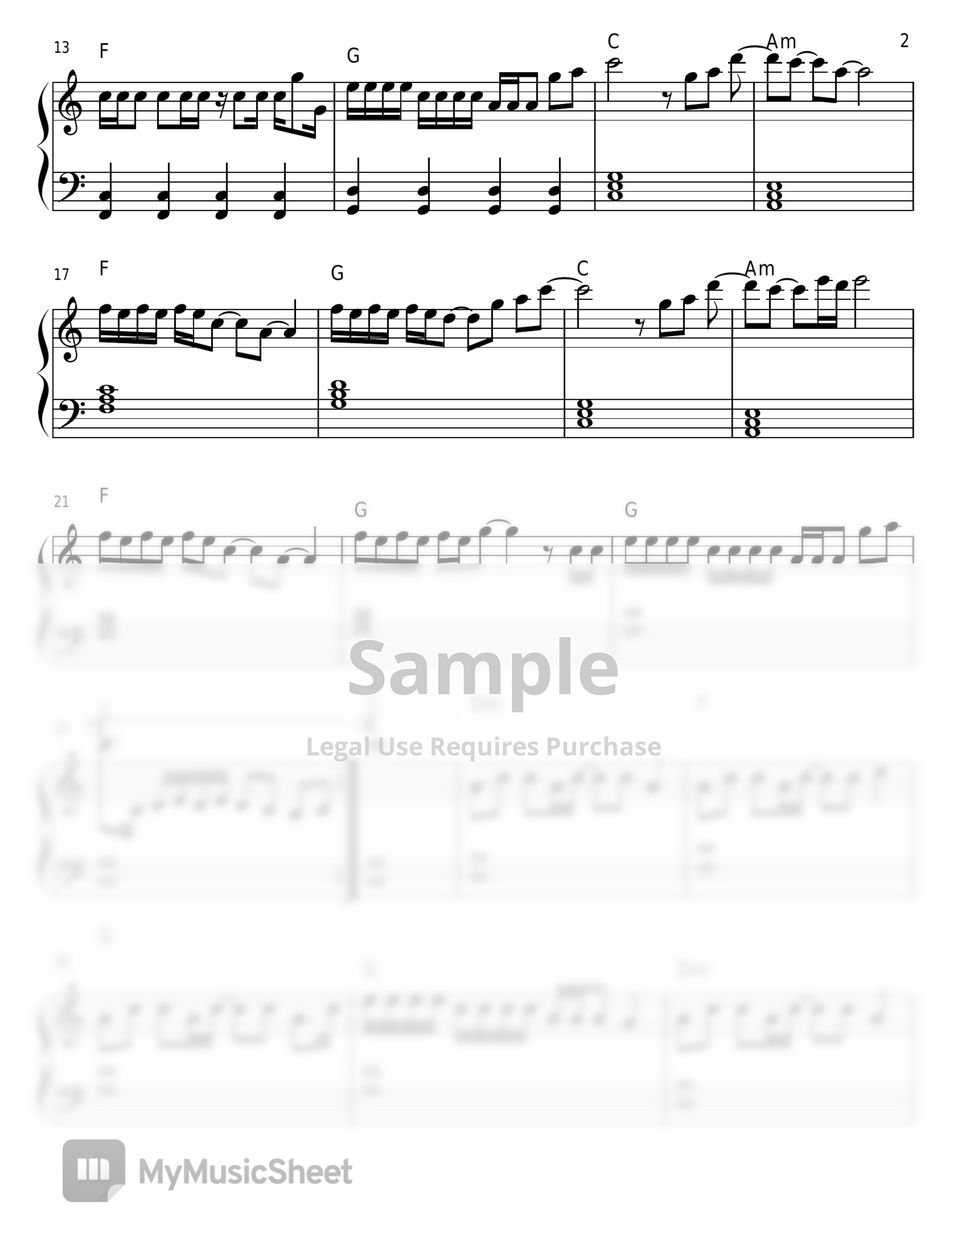 Taylor Swift - Me!( Very Easy Version) by Open Music Scores